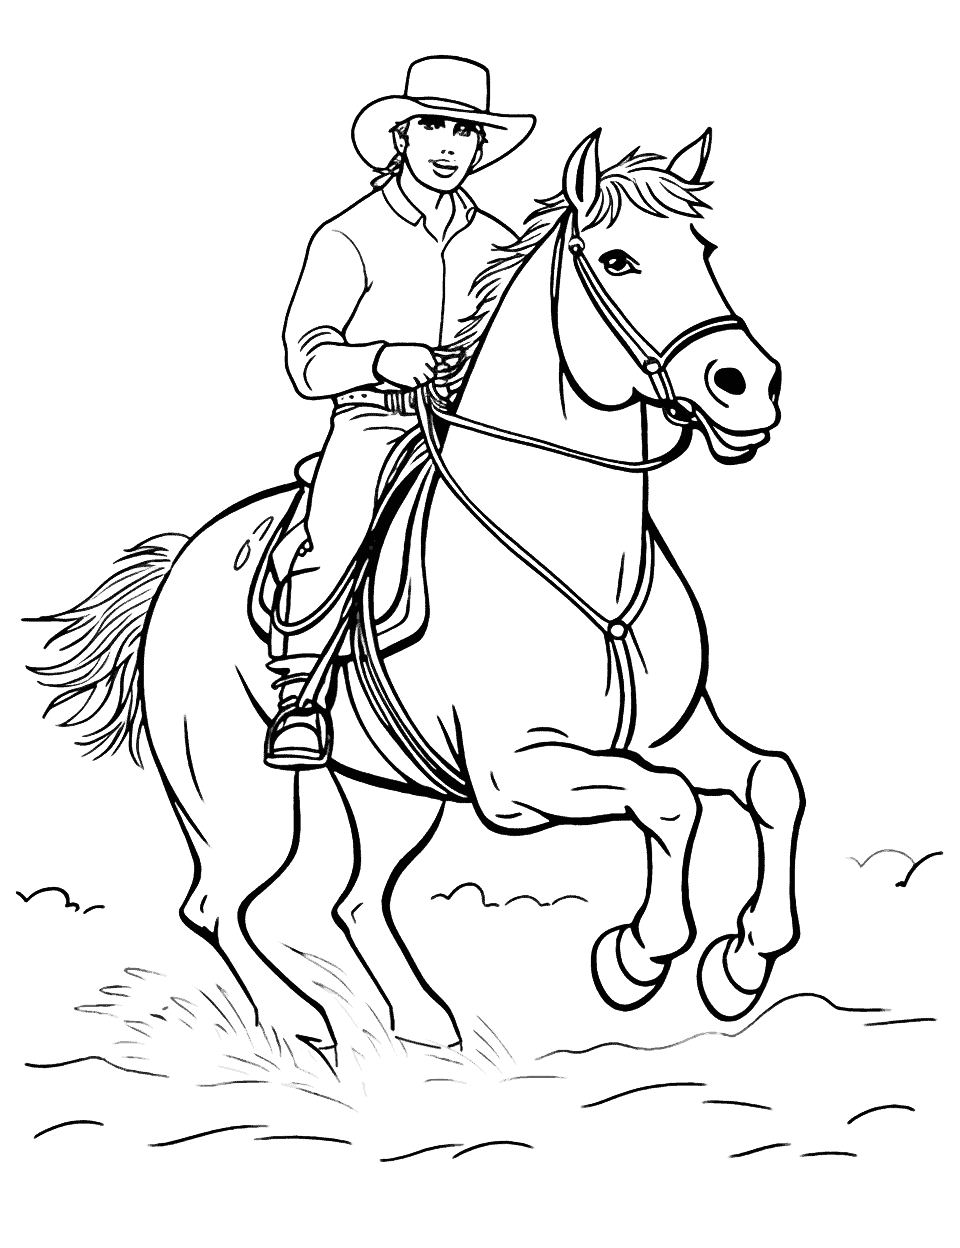 Rodeo Roundup Horse Coloring Page - A rodeo scene with a cowboy skillfully riding a bucking bronco.